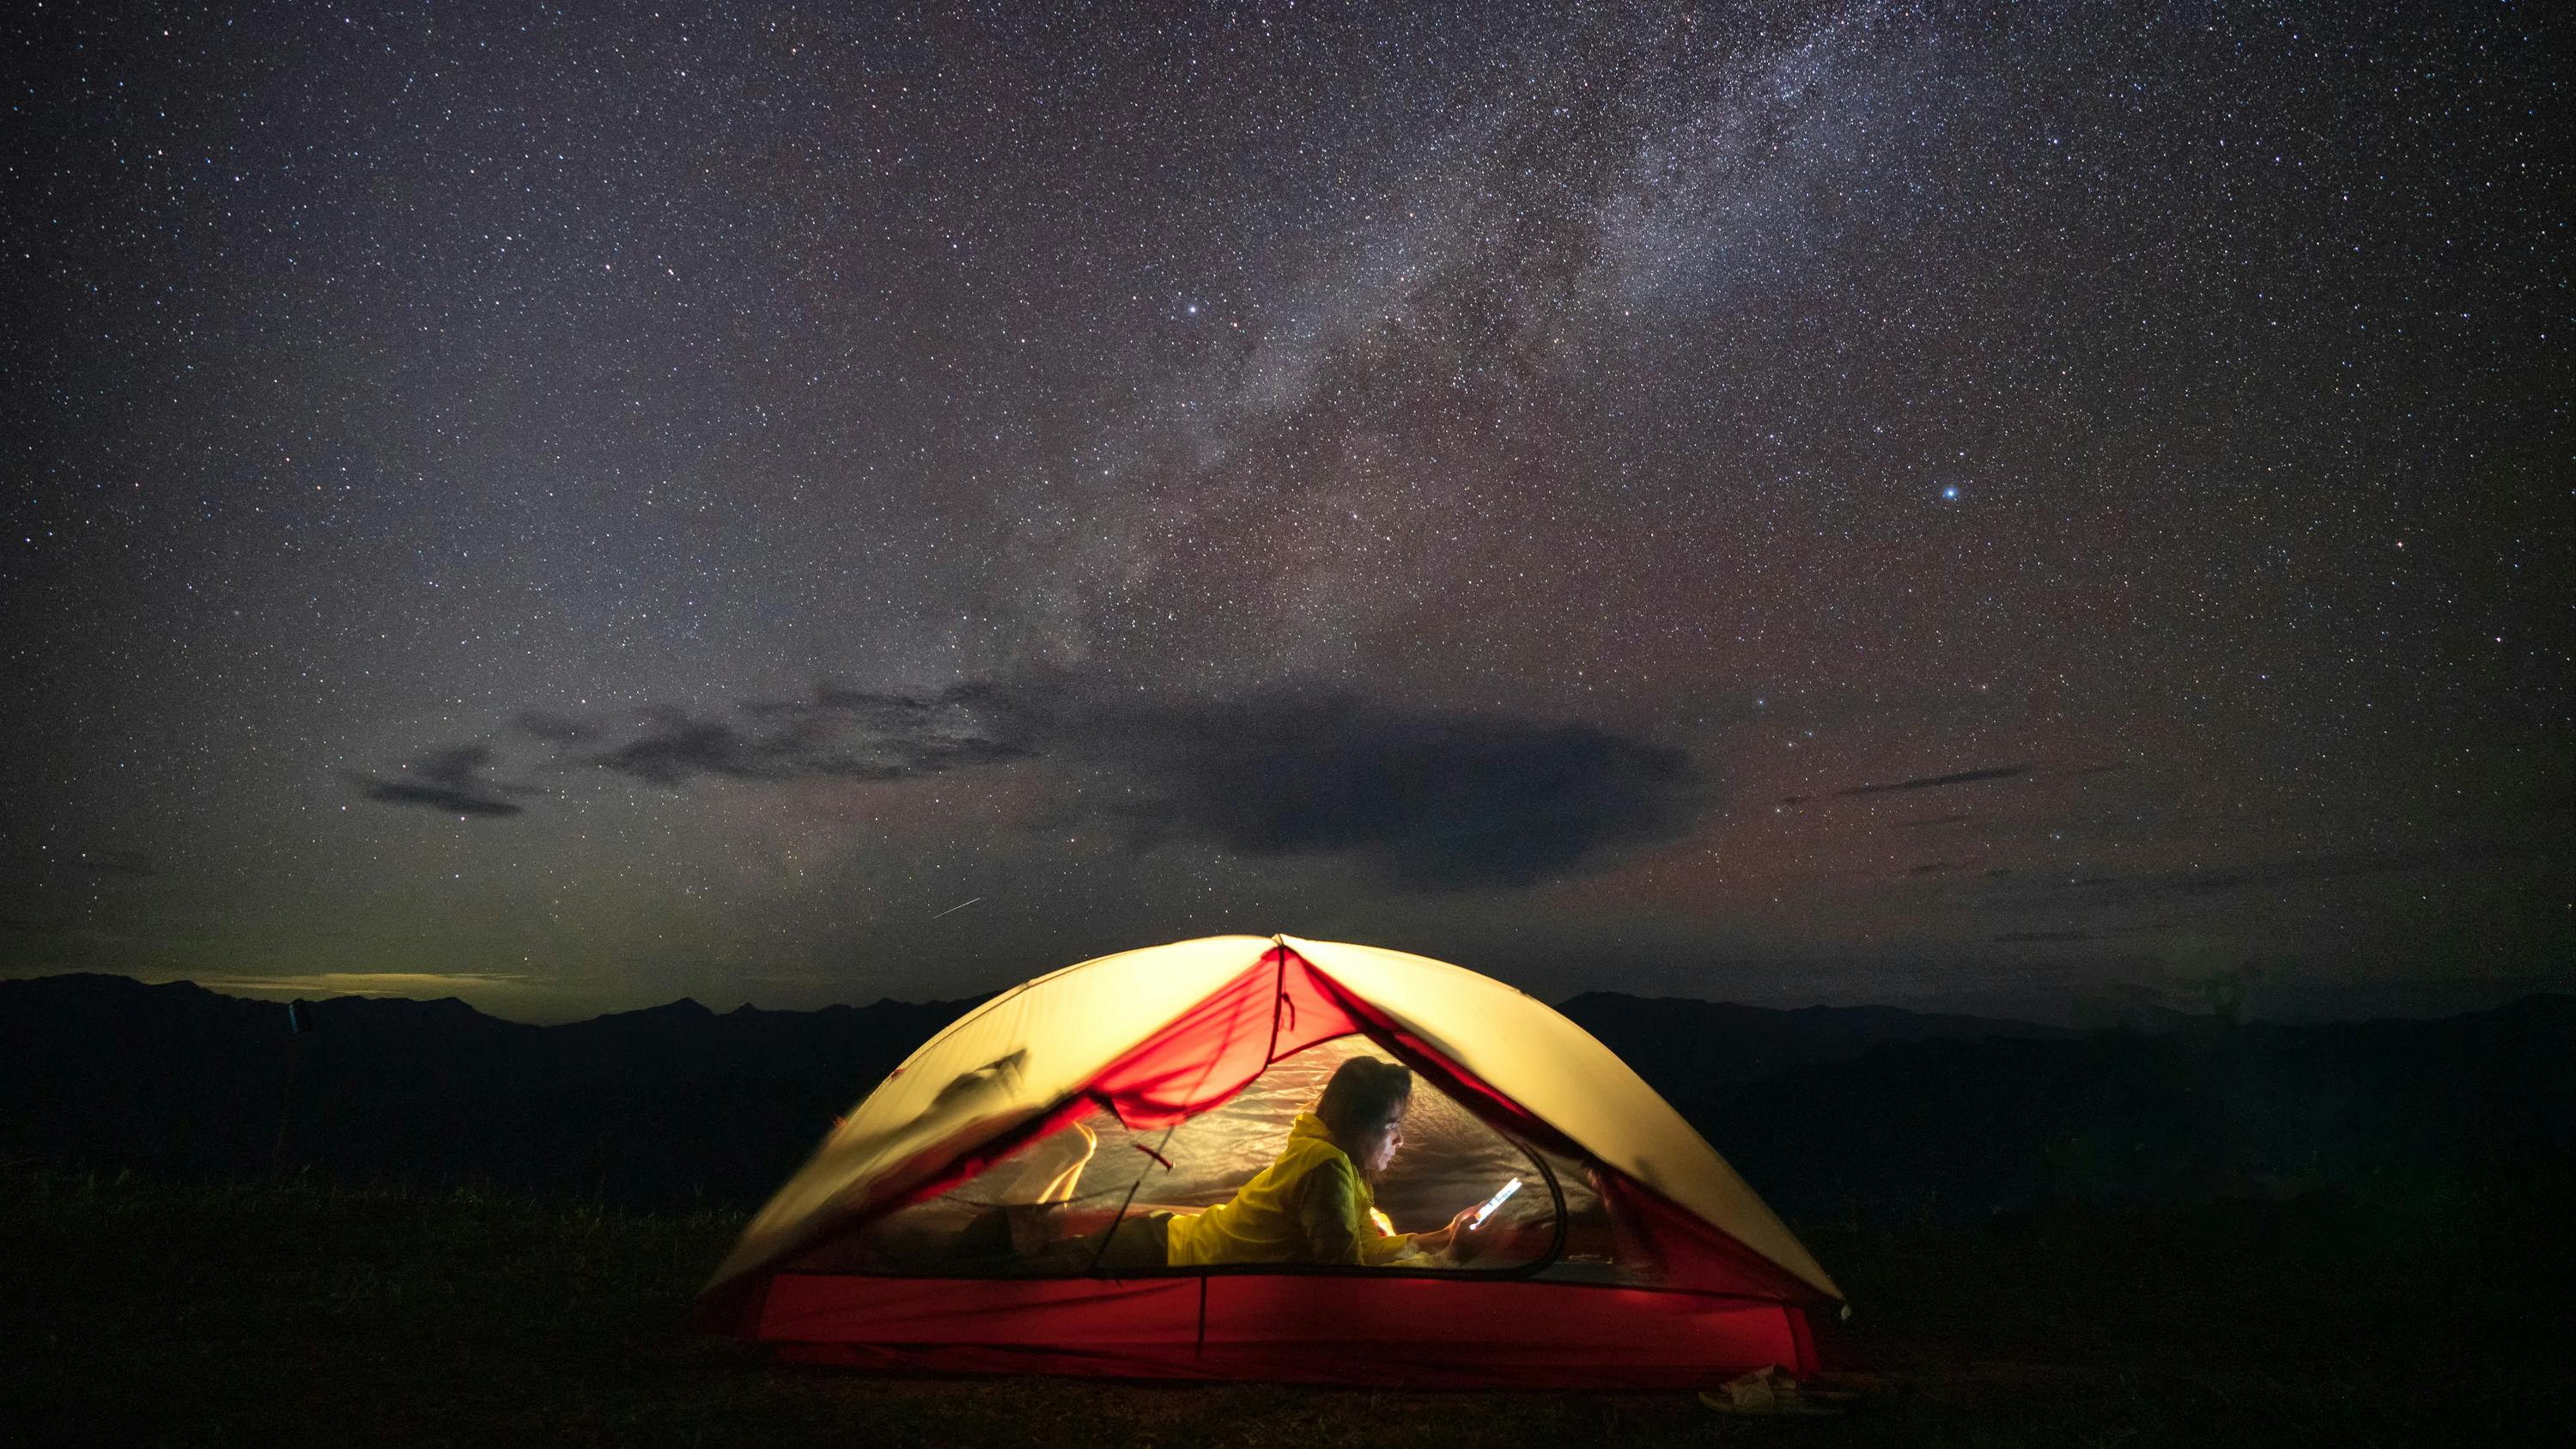 Someone laying in a tent using a smartphone against a starry sky